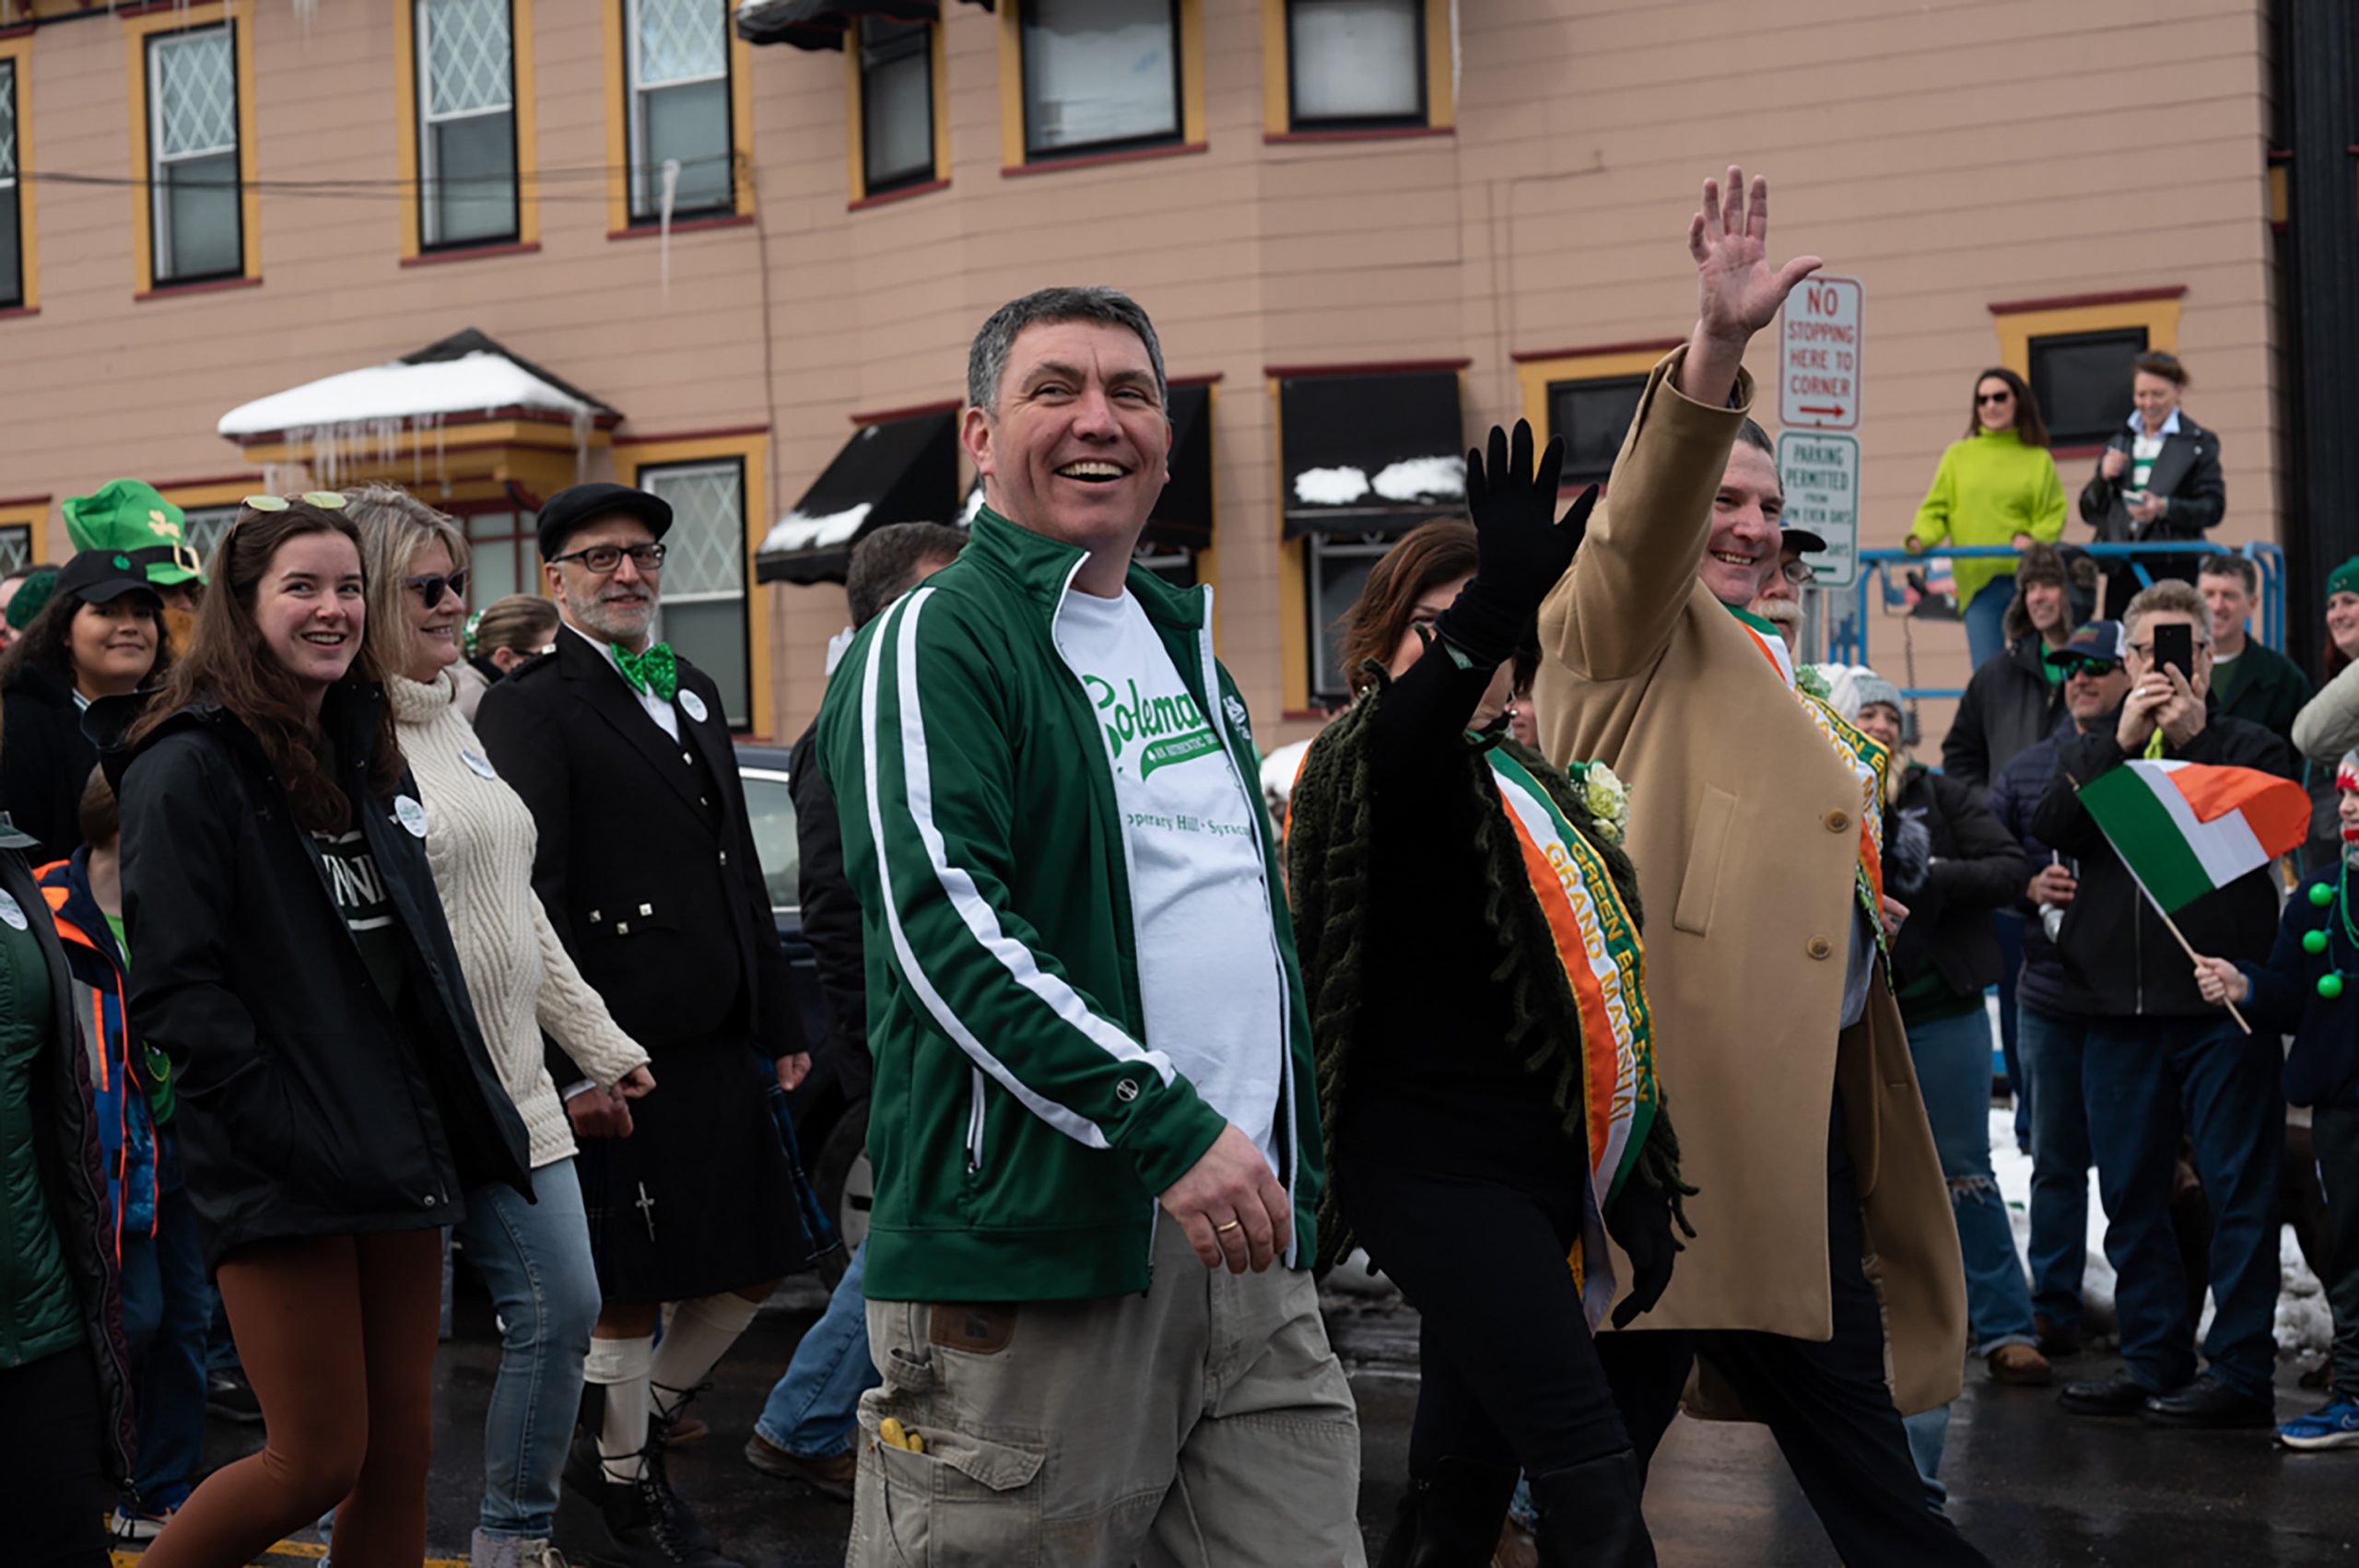 Dennis Coleman, son of Peter Coleman, walks with this year's Green Beer Day Grand Marshalls Mike and Mary Kay Ryan (pictured with their hands waving).